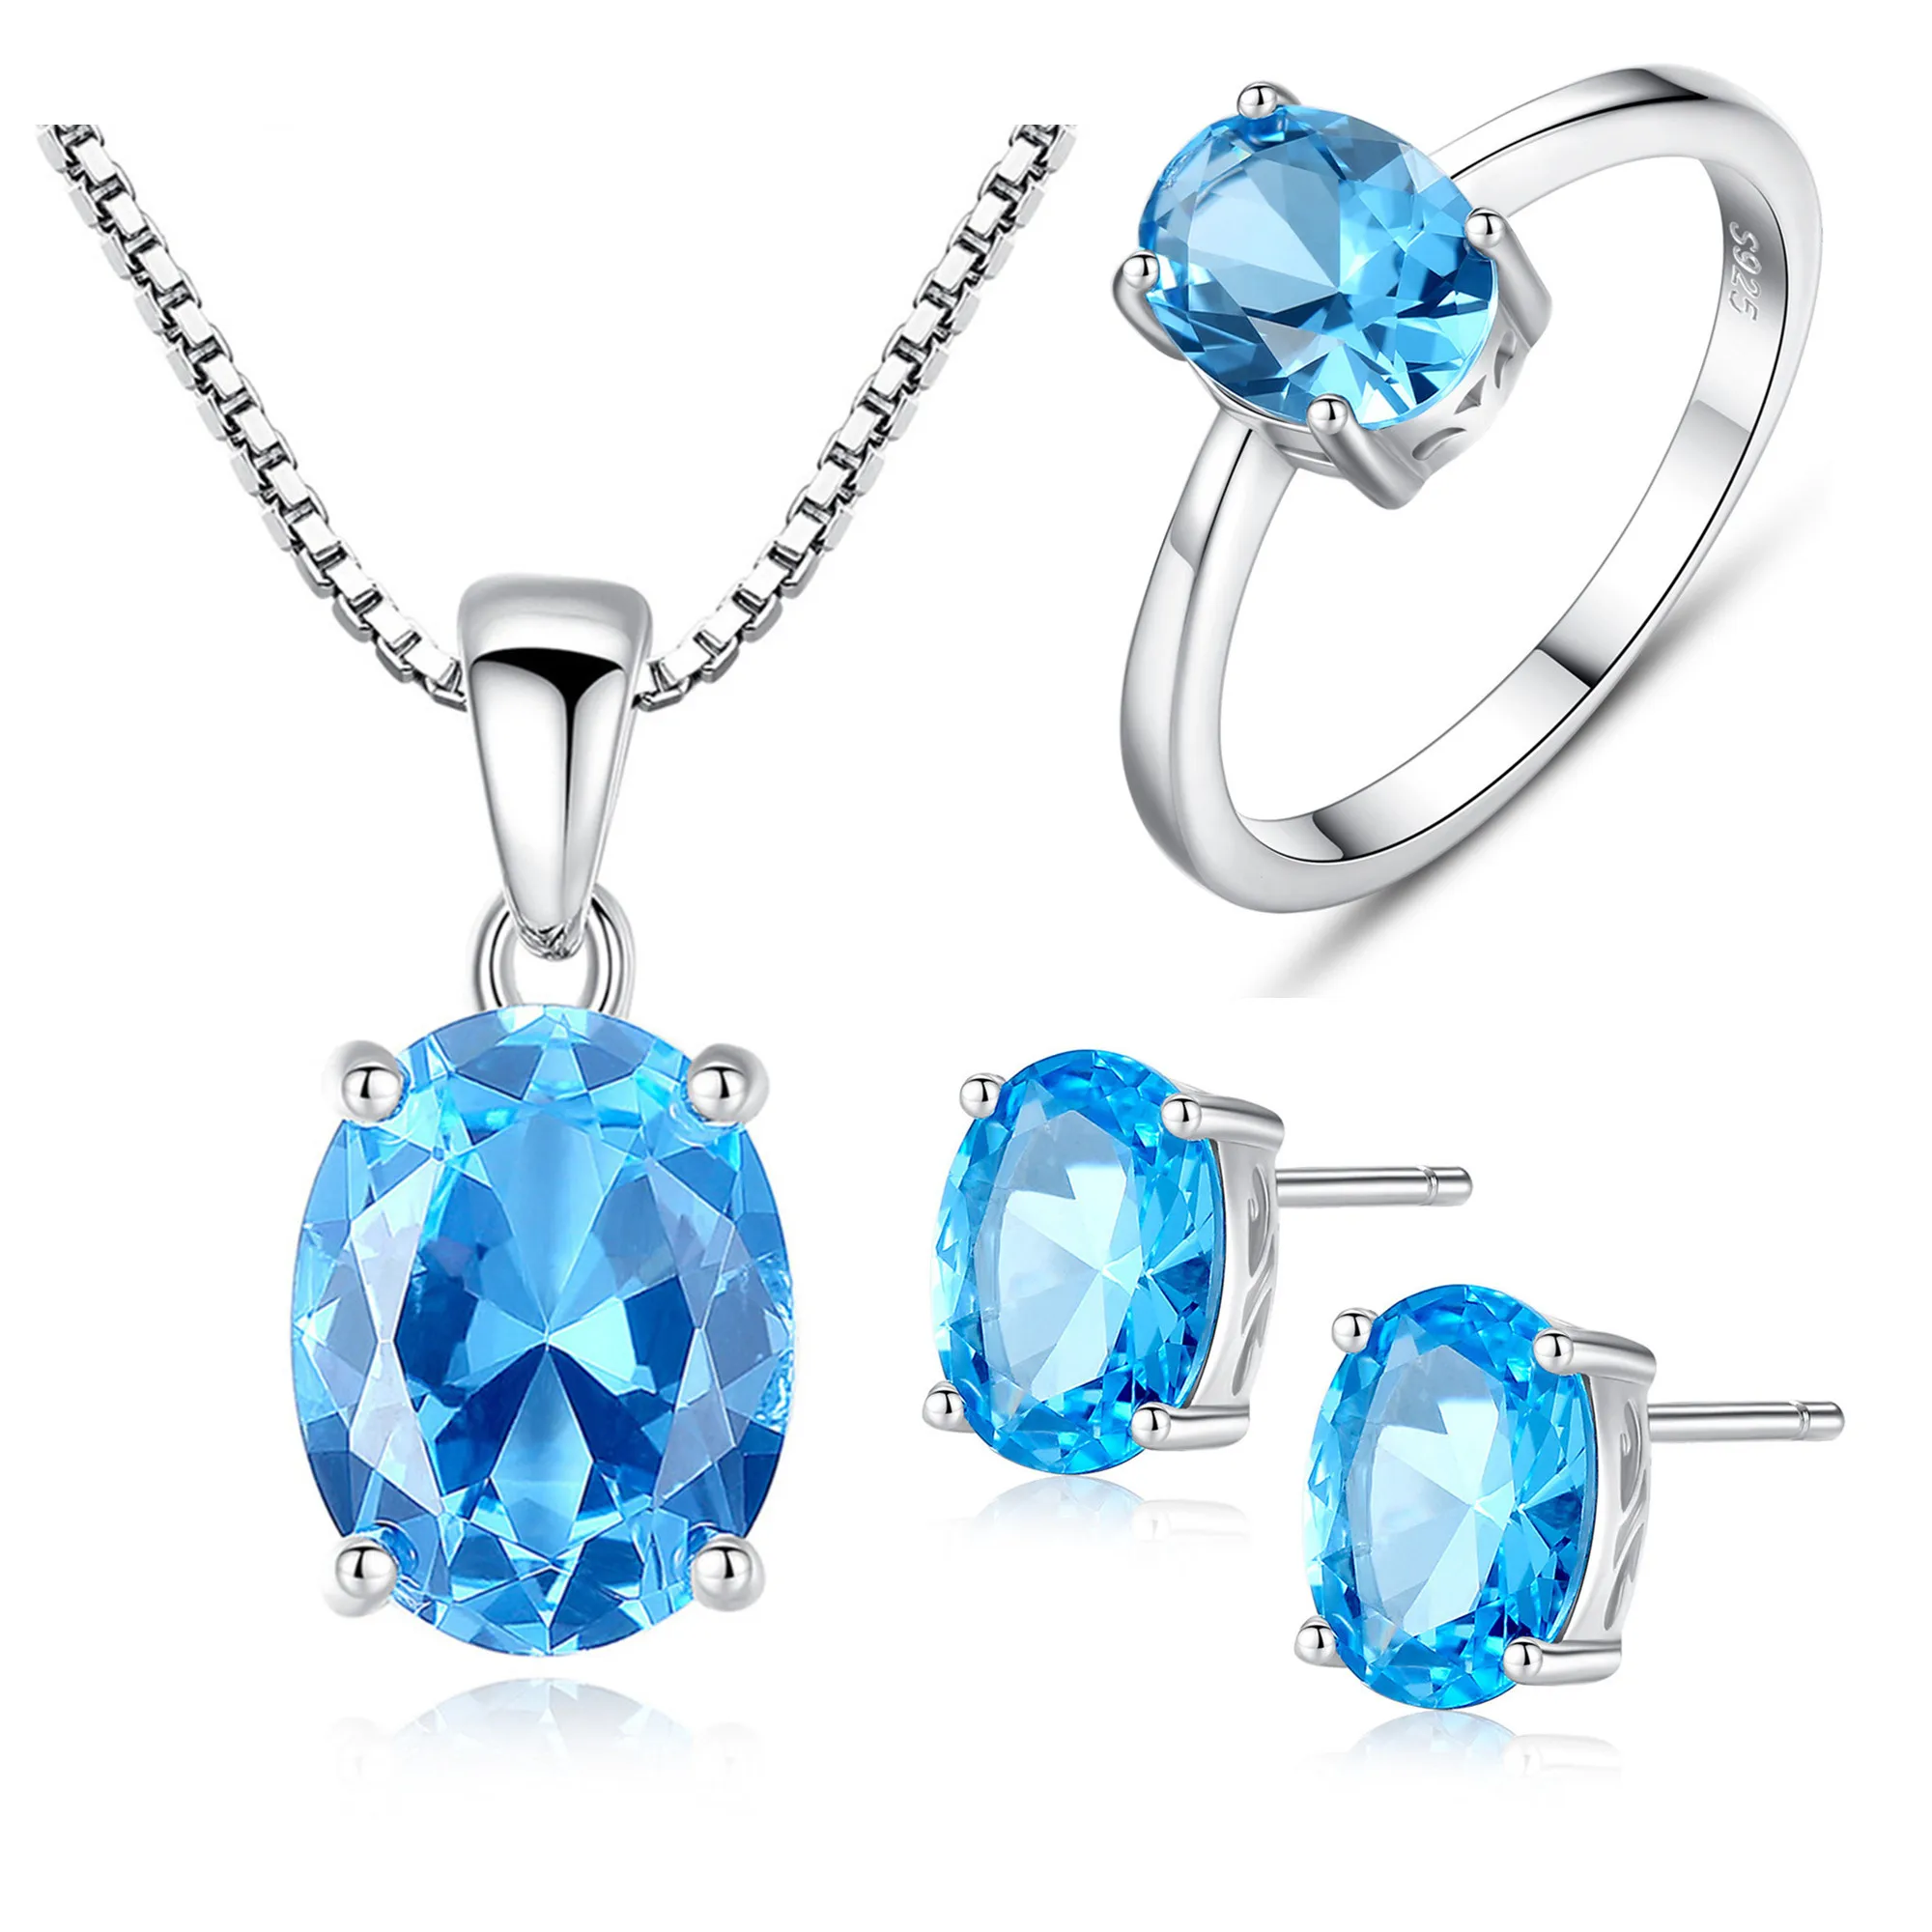 Fashion Women Jewelry Set 925 Sterling Silver Jewelry Cubic Zirconia Oval Cut Synthetic Blue Sapphire Ring Necklace Earring